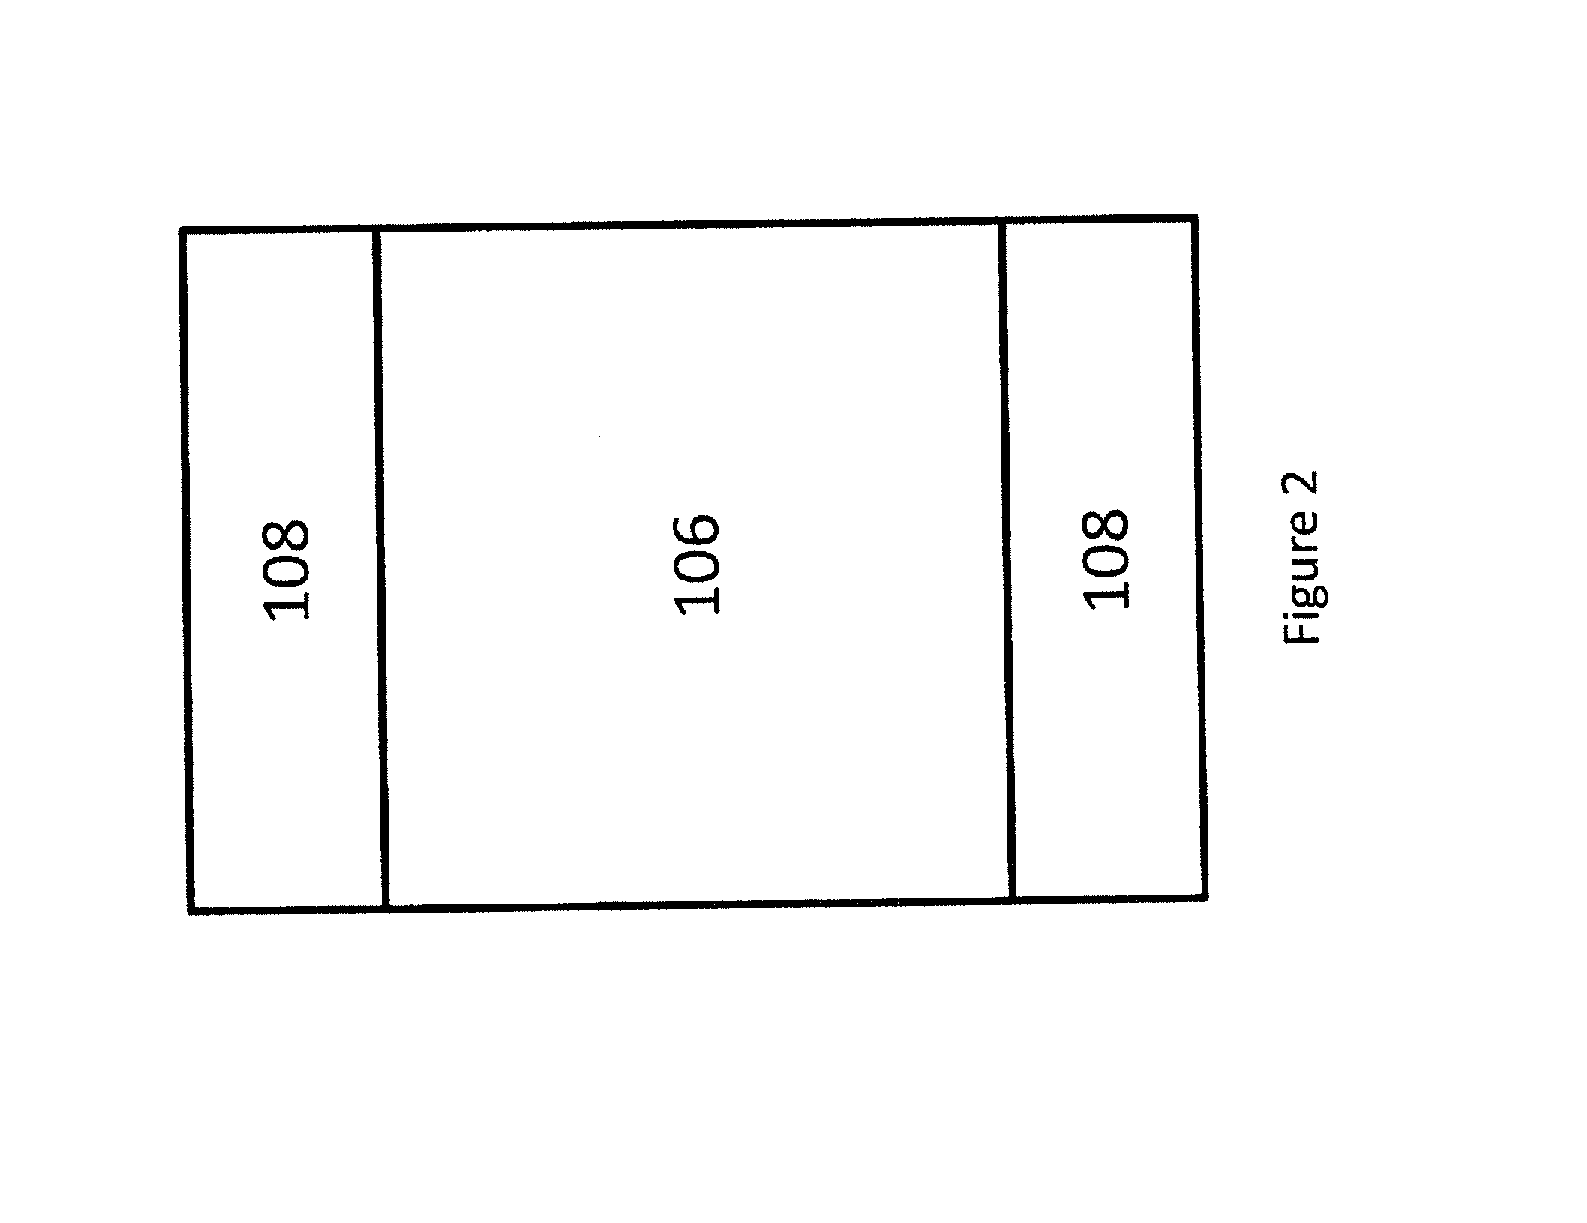 Scintillating Organic Materials and Methods For Detecting Neutron and Gamma Radiation